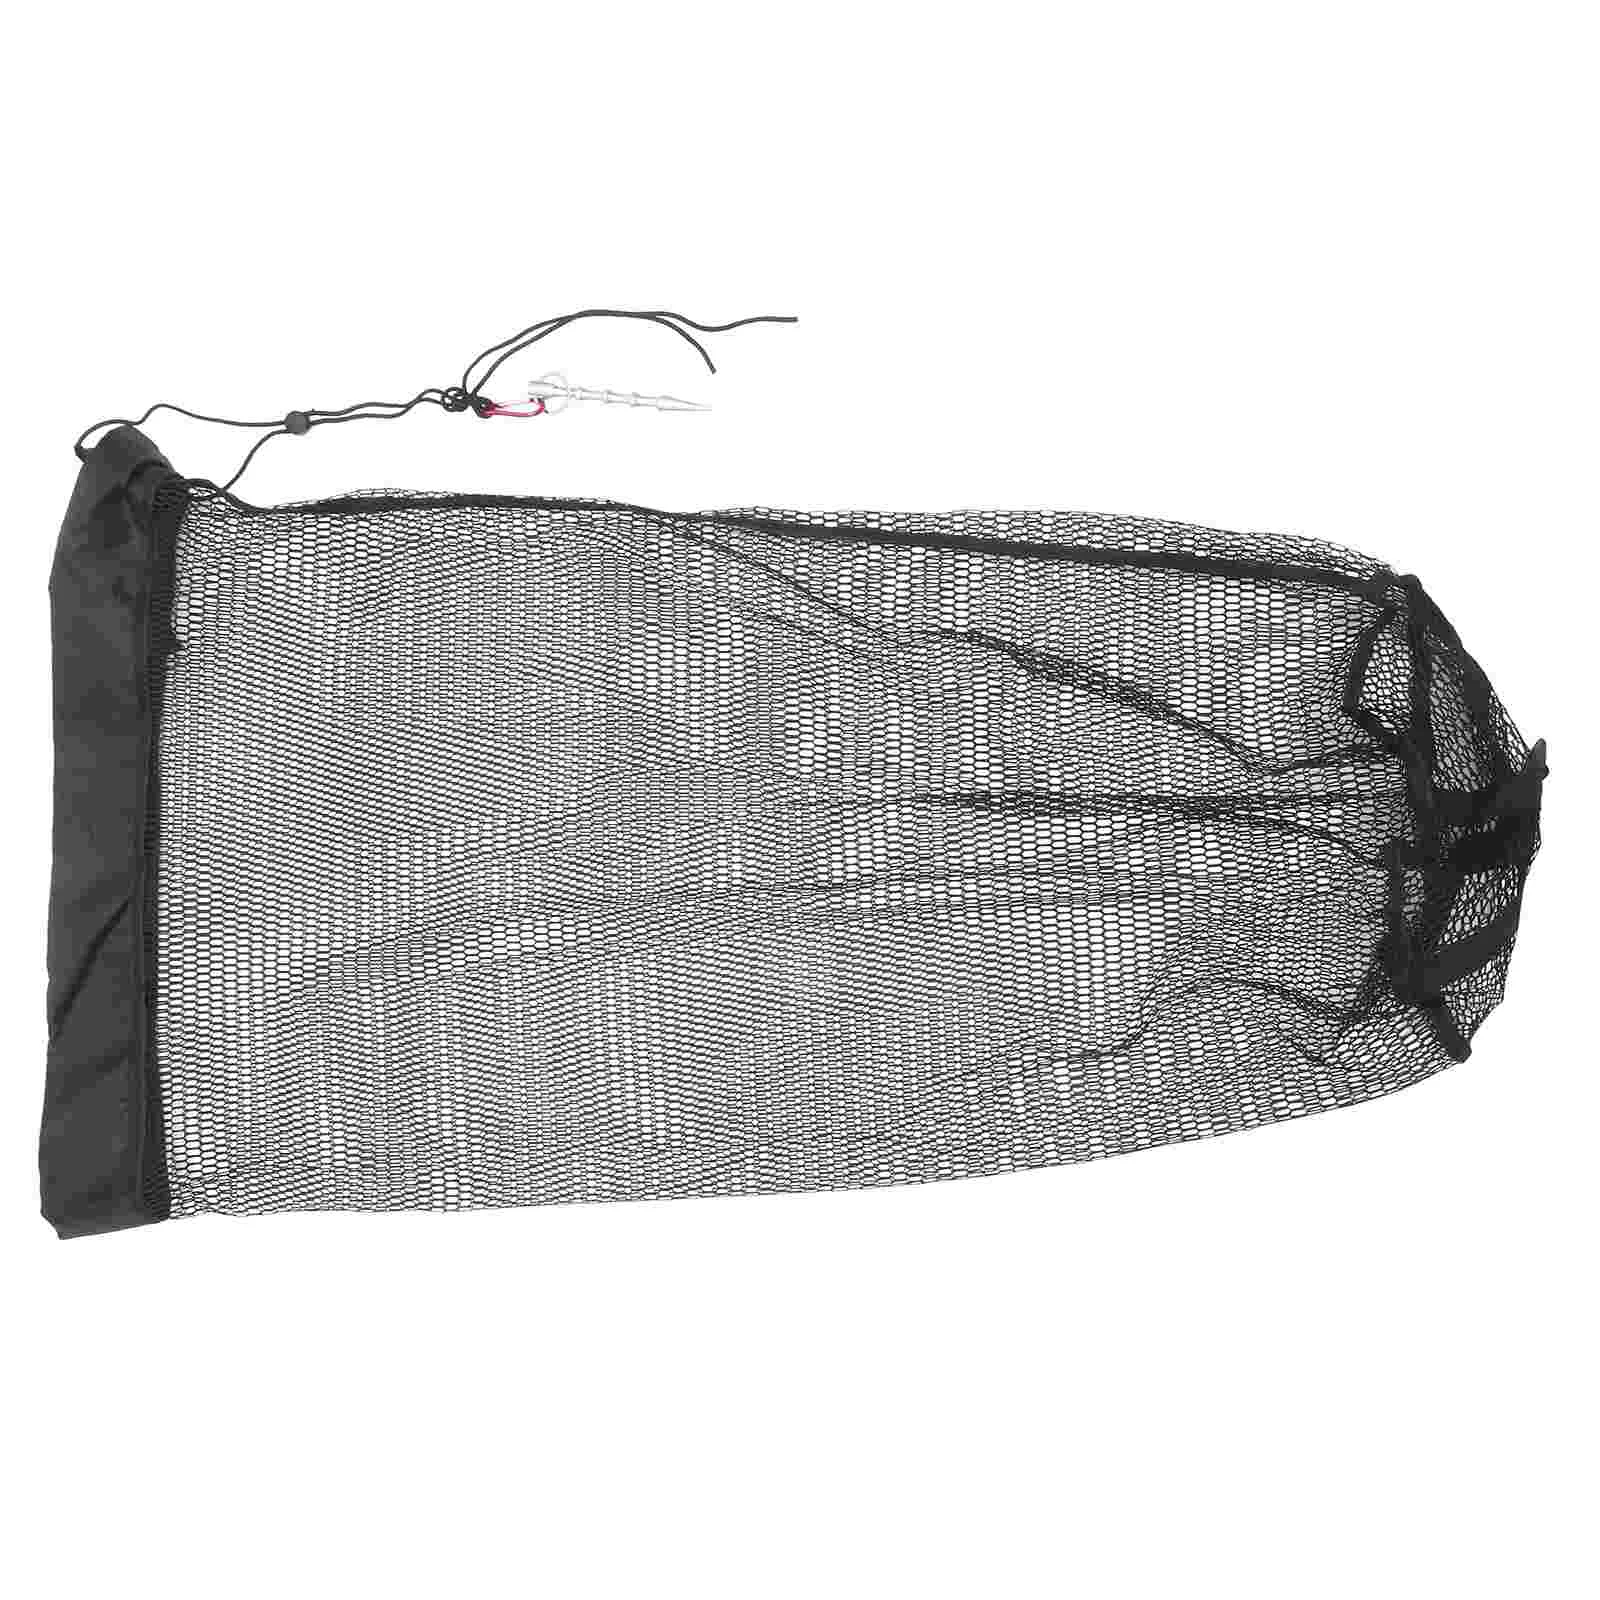 

Fish Protection Locating Net Fishing Guard Mesh Foldable Bag Basket Guards Catching Supplies Nylon Folding Nets Collapsible